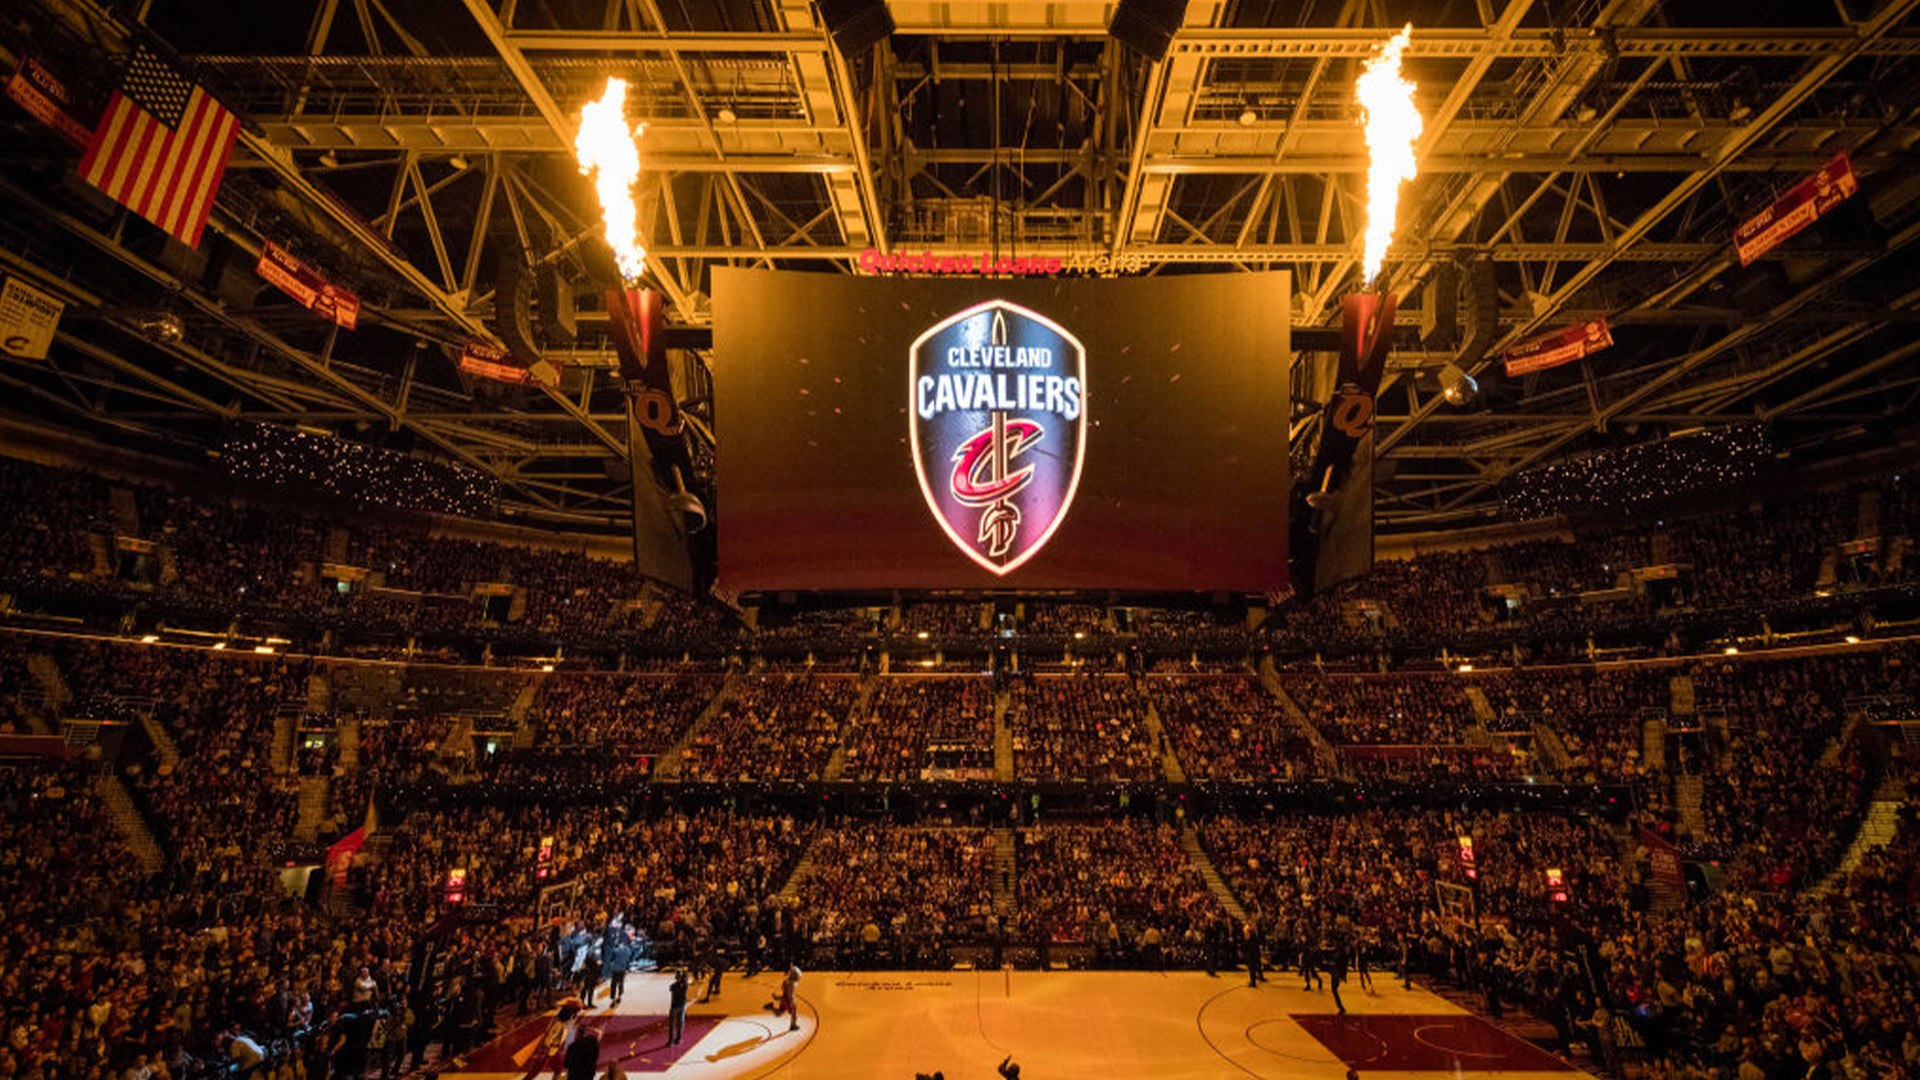 Cleveland Cavaliers Launch An EdTech Program To Improve The Literacy Rate For Ohio Students